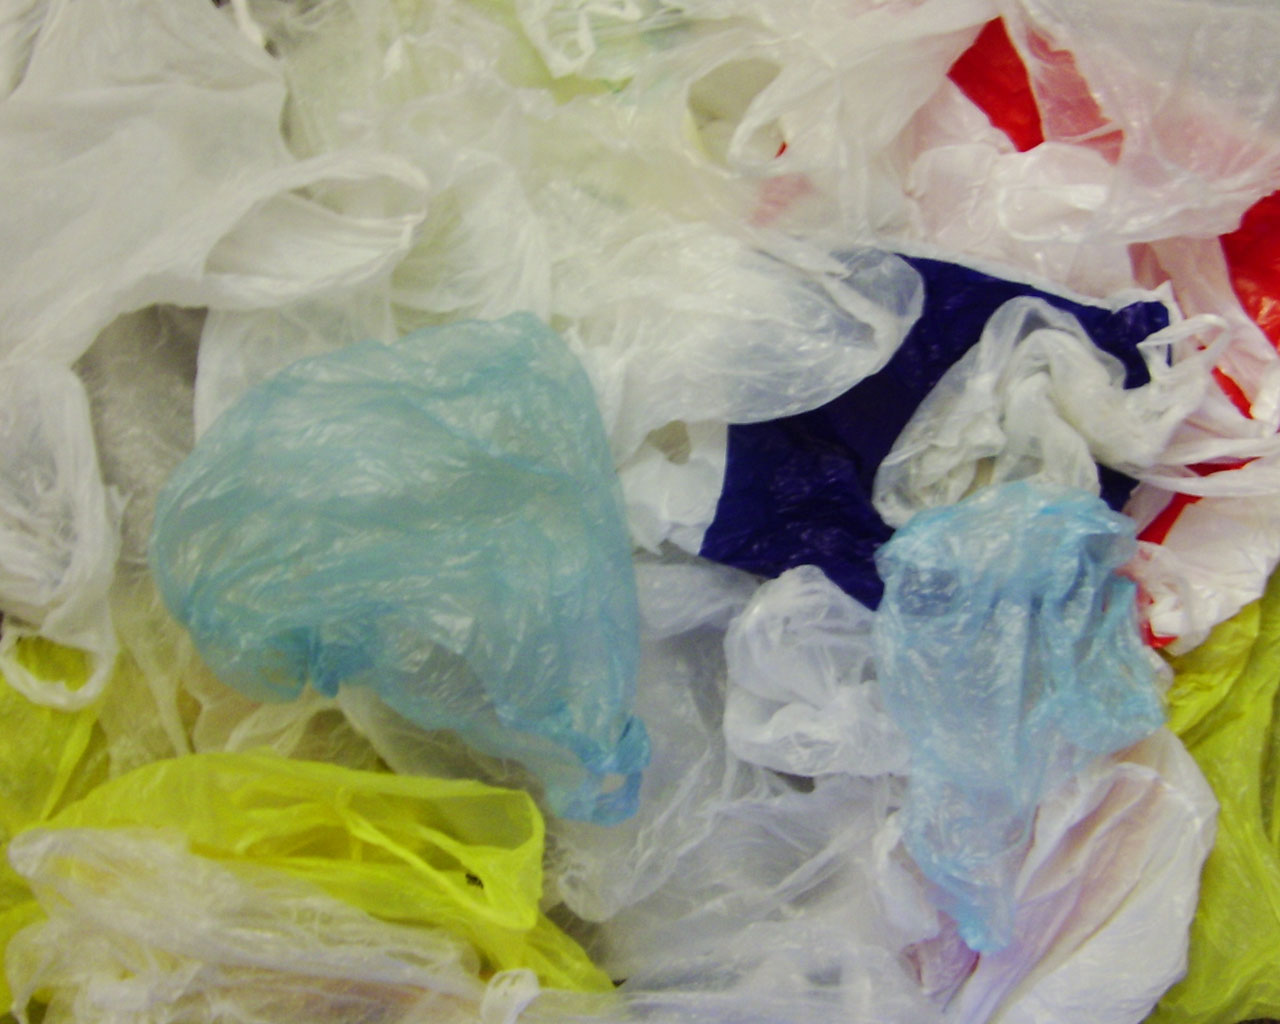 Somers Point Residents Torn Over New Plastic Bag Fee Meant To Protect Environment